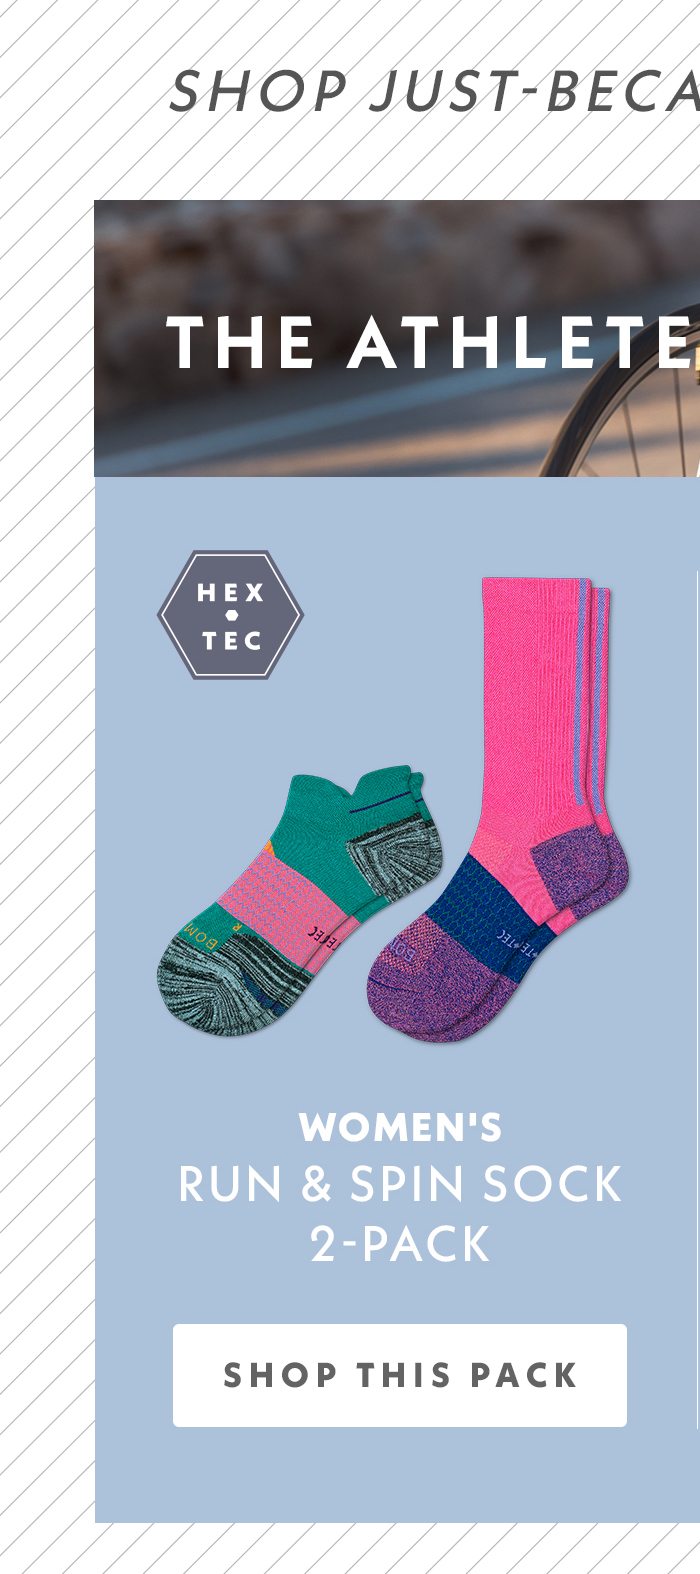 Shop Just-Because Gifts For... | The Athlete | Hex Tec | Women's Run & Spin Sock 2-Pack | Shop This Pack